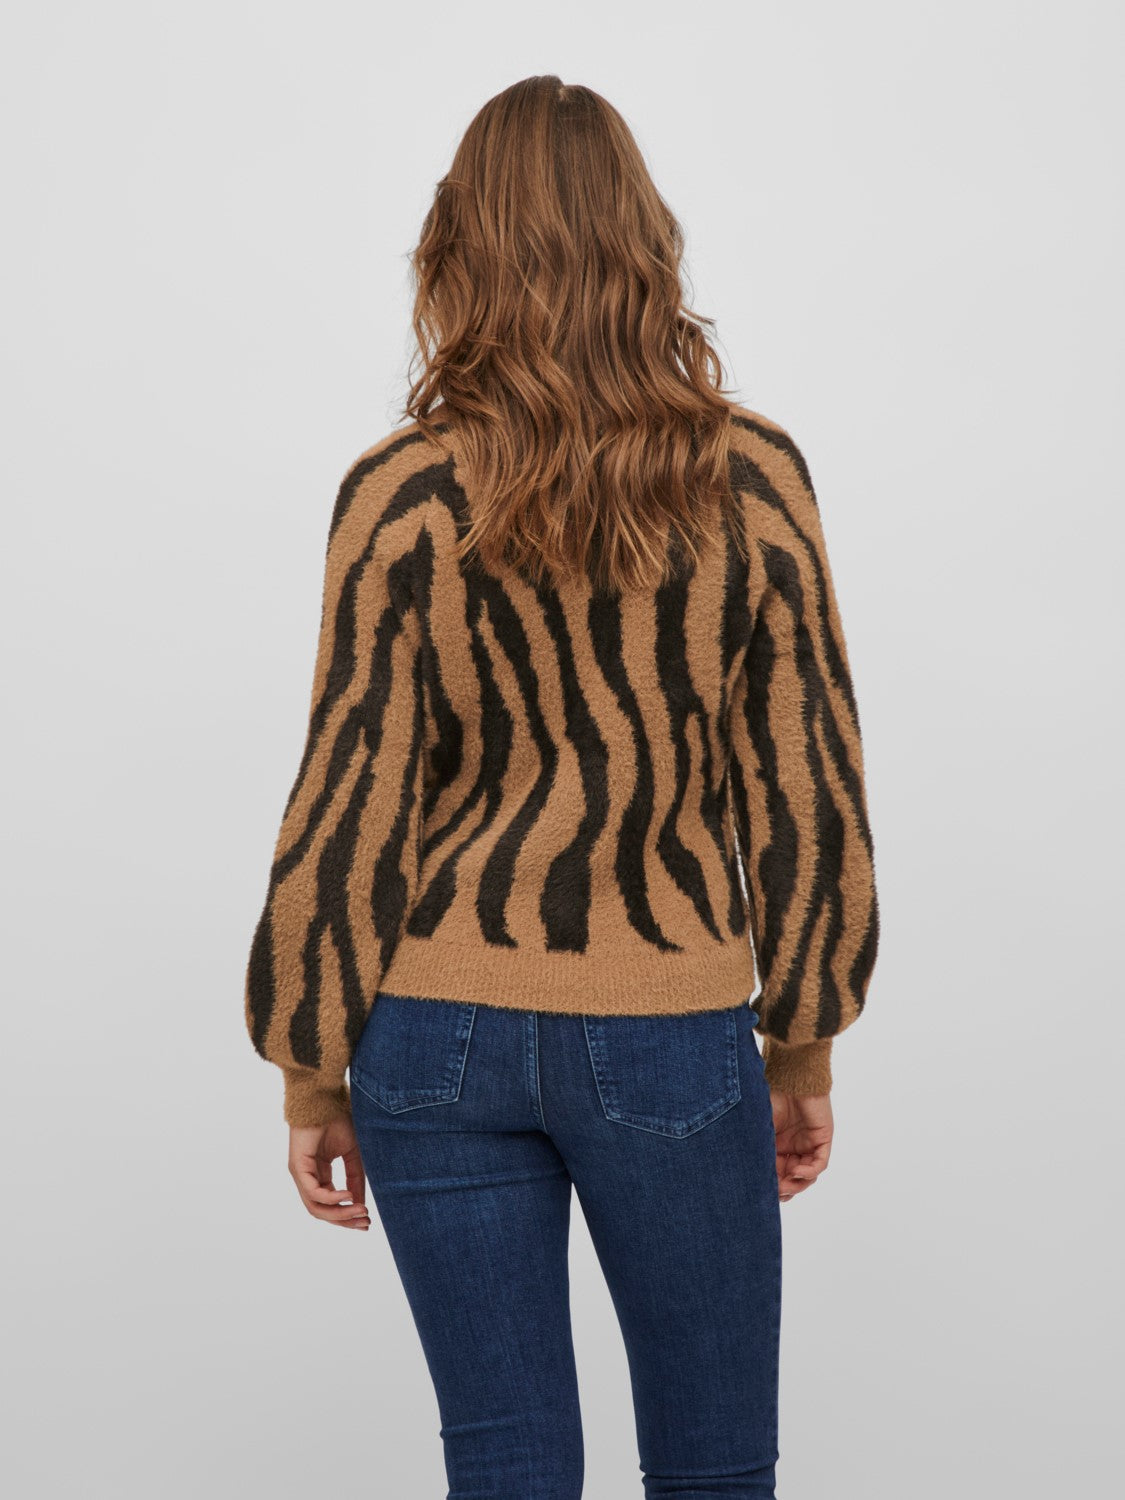 Ello Knit Top (Toasted Coconut)